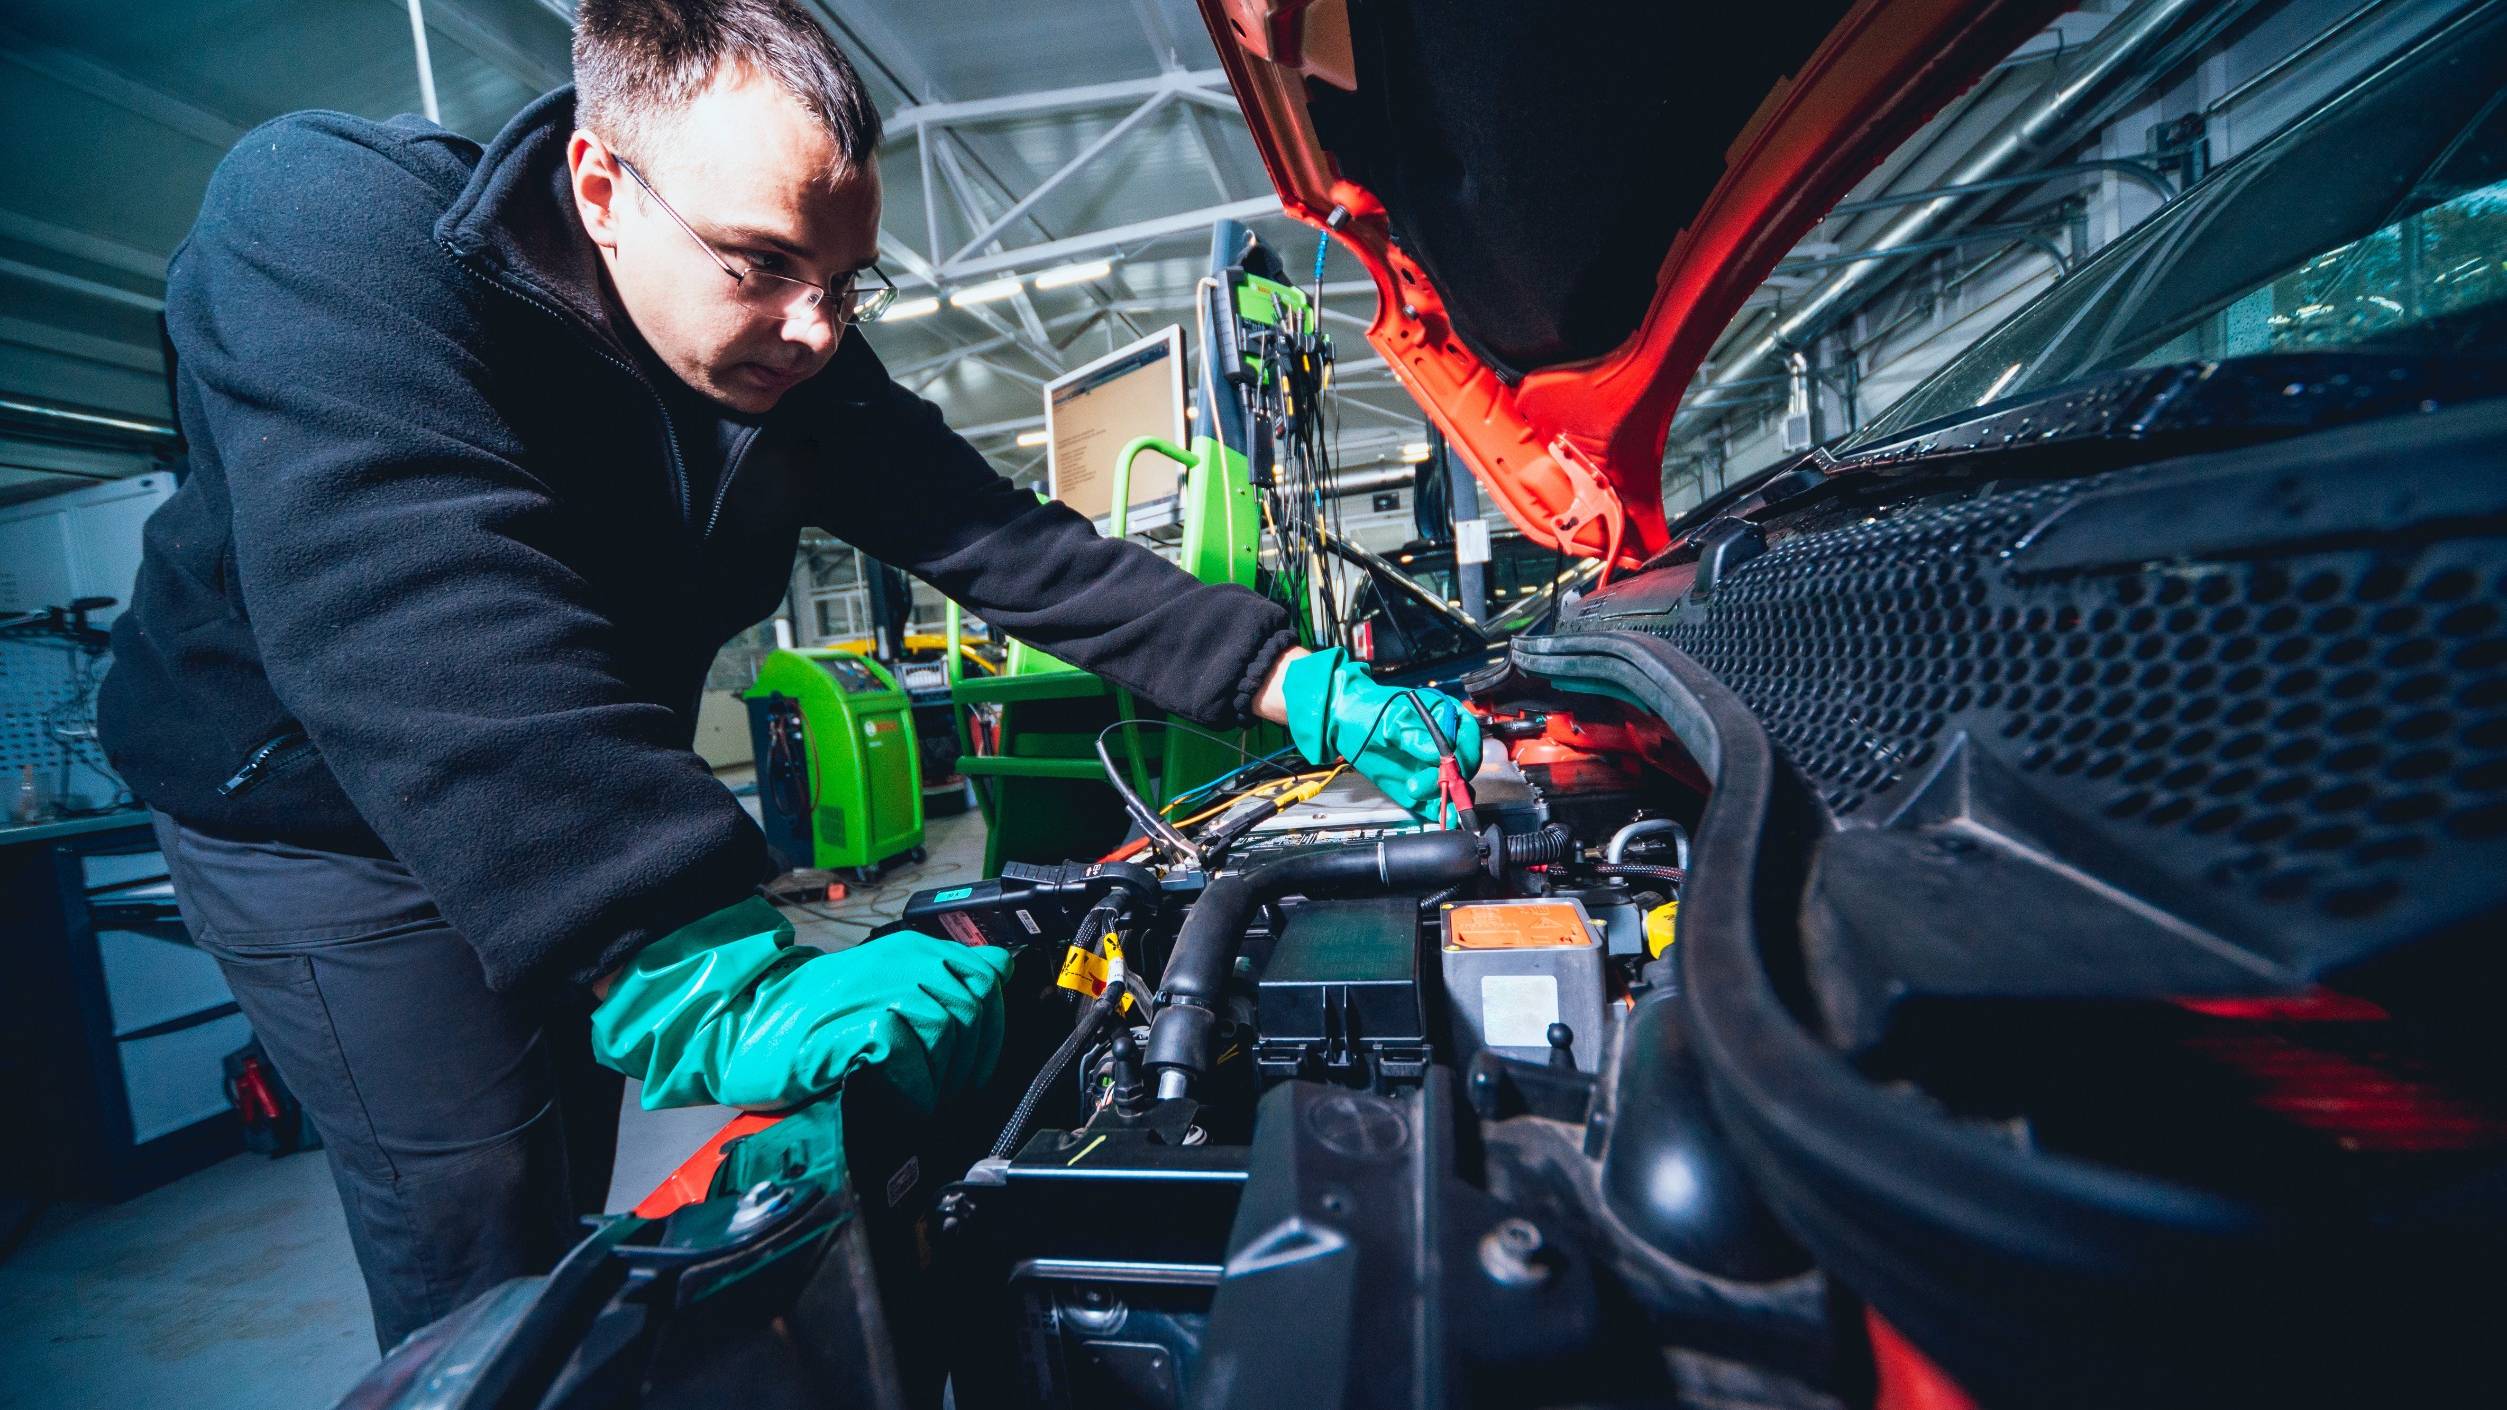 Garages struggle with training time needed for EV skills - picture shows a mechanic working on an EV engine